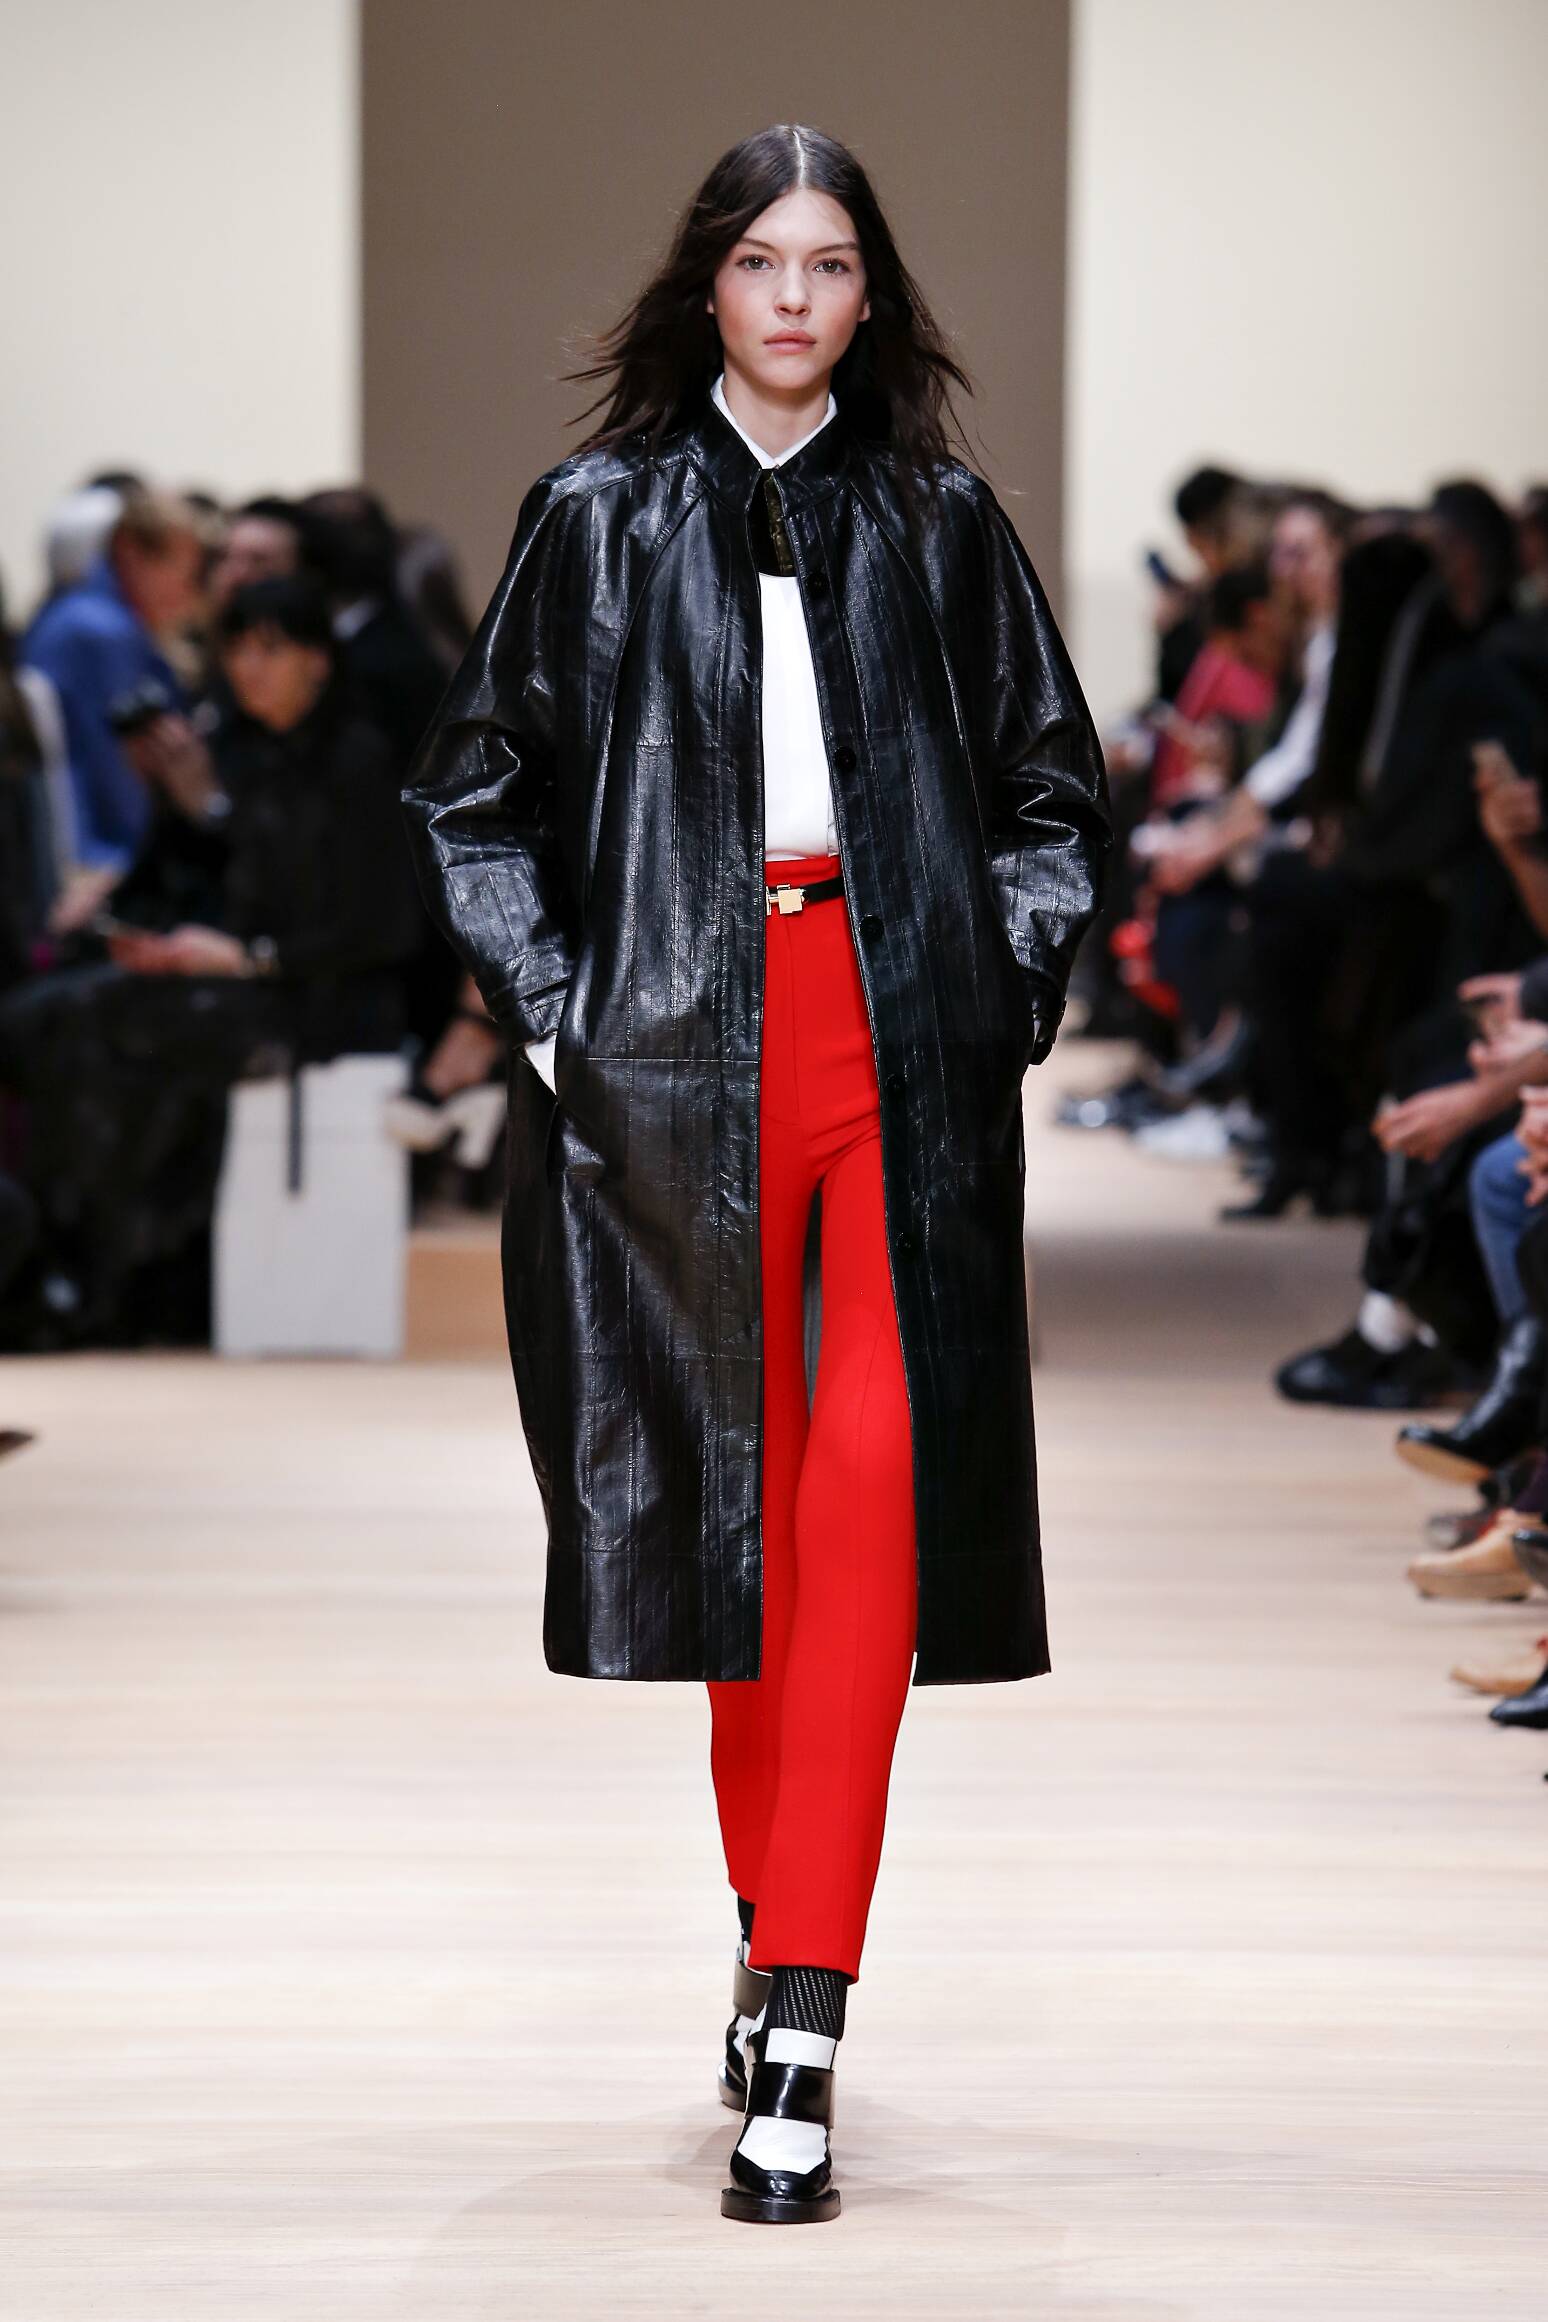 CARVEN FALL WINTER 2015-16 WOMEN'S COLLECTION | The Skinny Beep